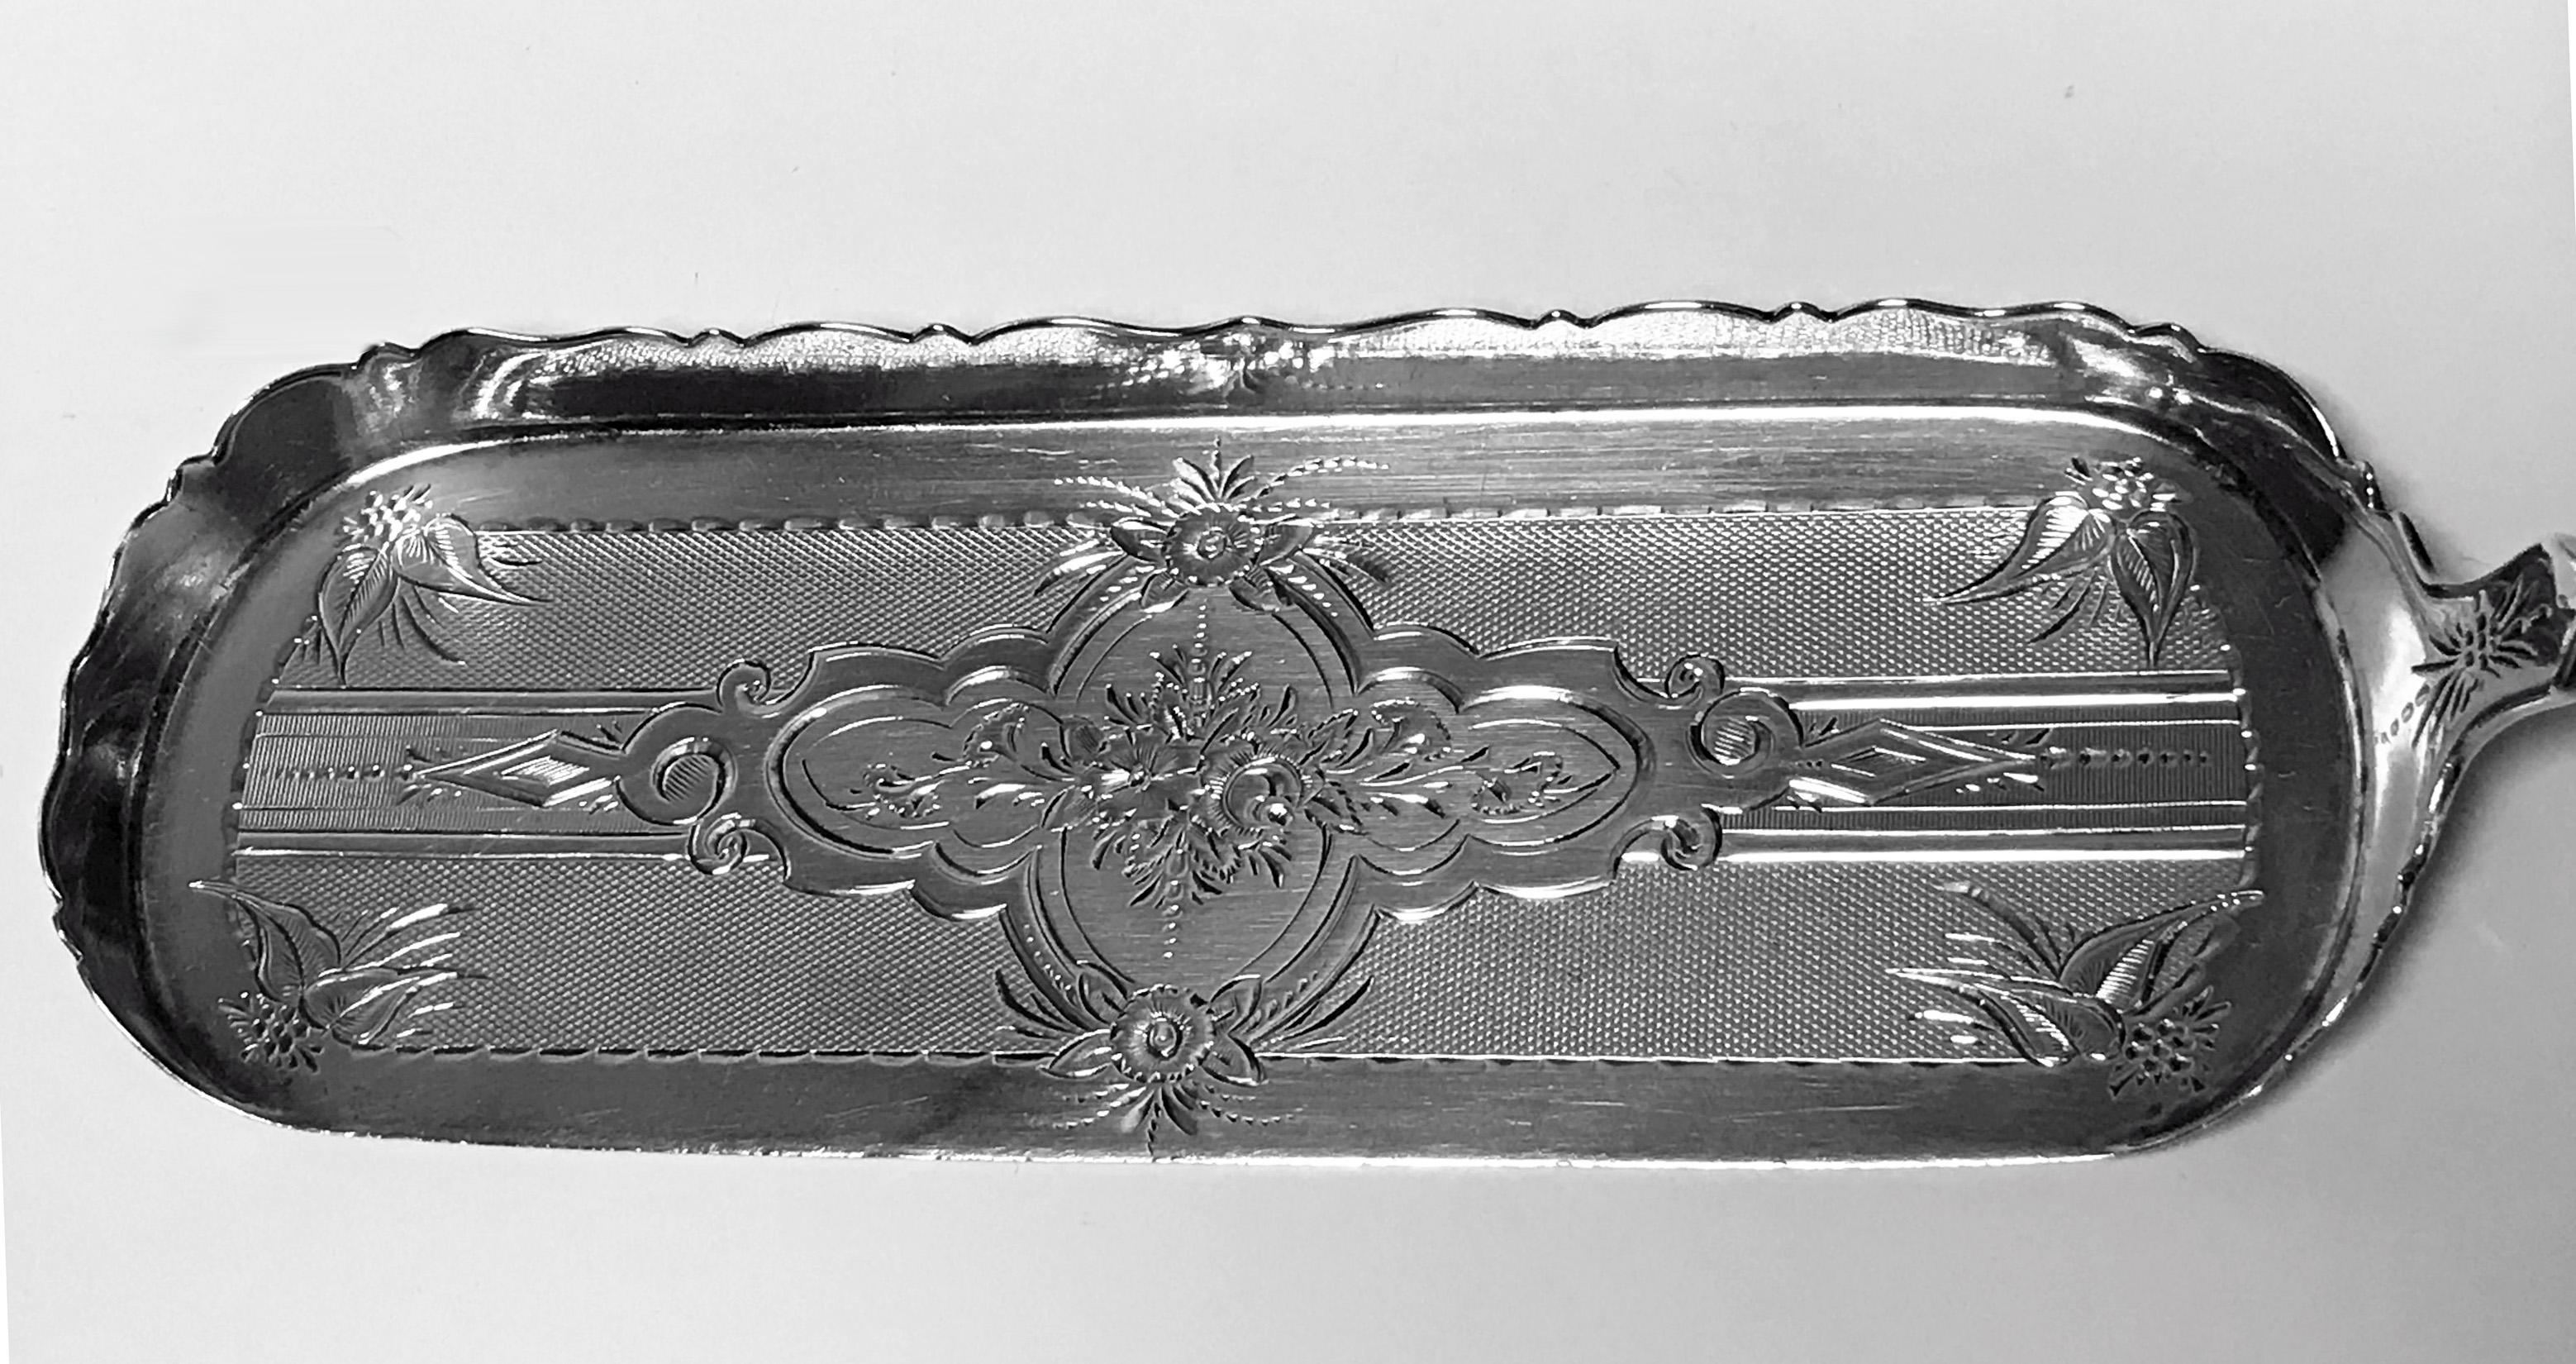 William Gale American sterling silver crumb scoop slice, circa 1860. Beautiful engine turned and foliate engraved with spiral stem to shaped handle. Monogram possibly MEH intertwined. Stamped W.Gale & Son 925 Sterling on reverse. Measures: Length